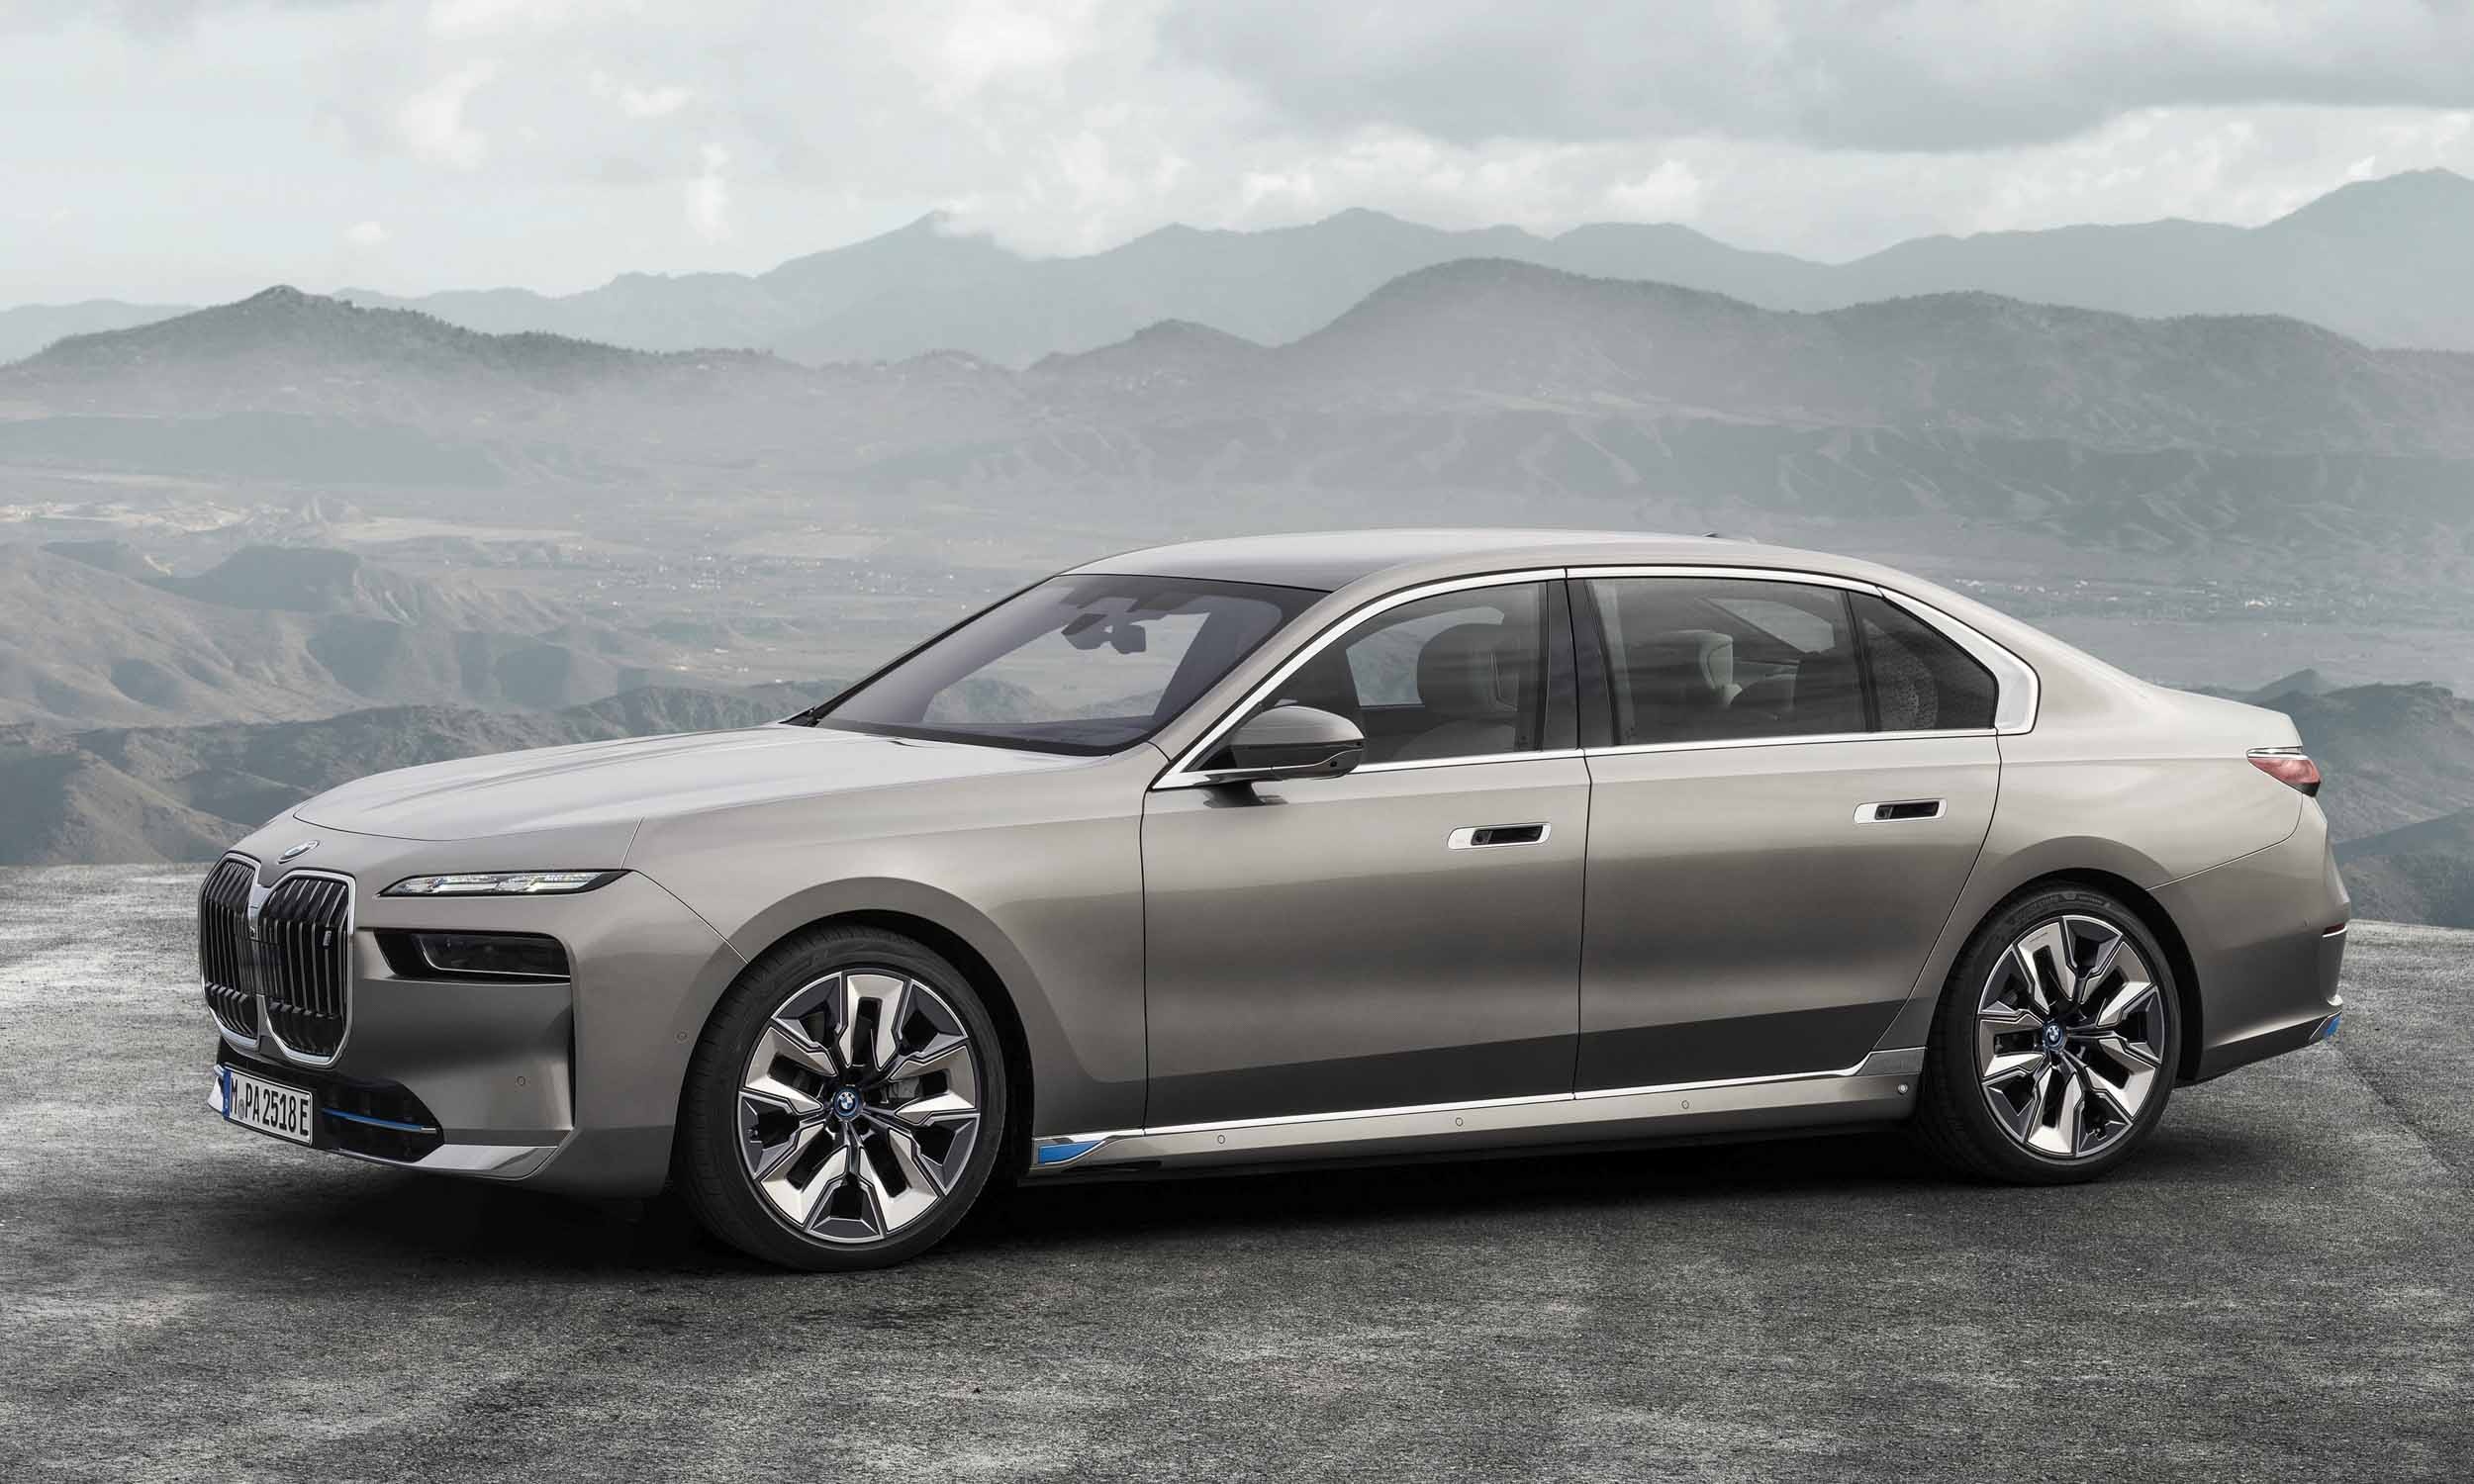 2023 BMW 7 Series, First glimpse, Futuristic styling, Performance excellence, 2500x1500 HD Desktop